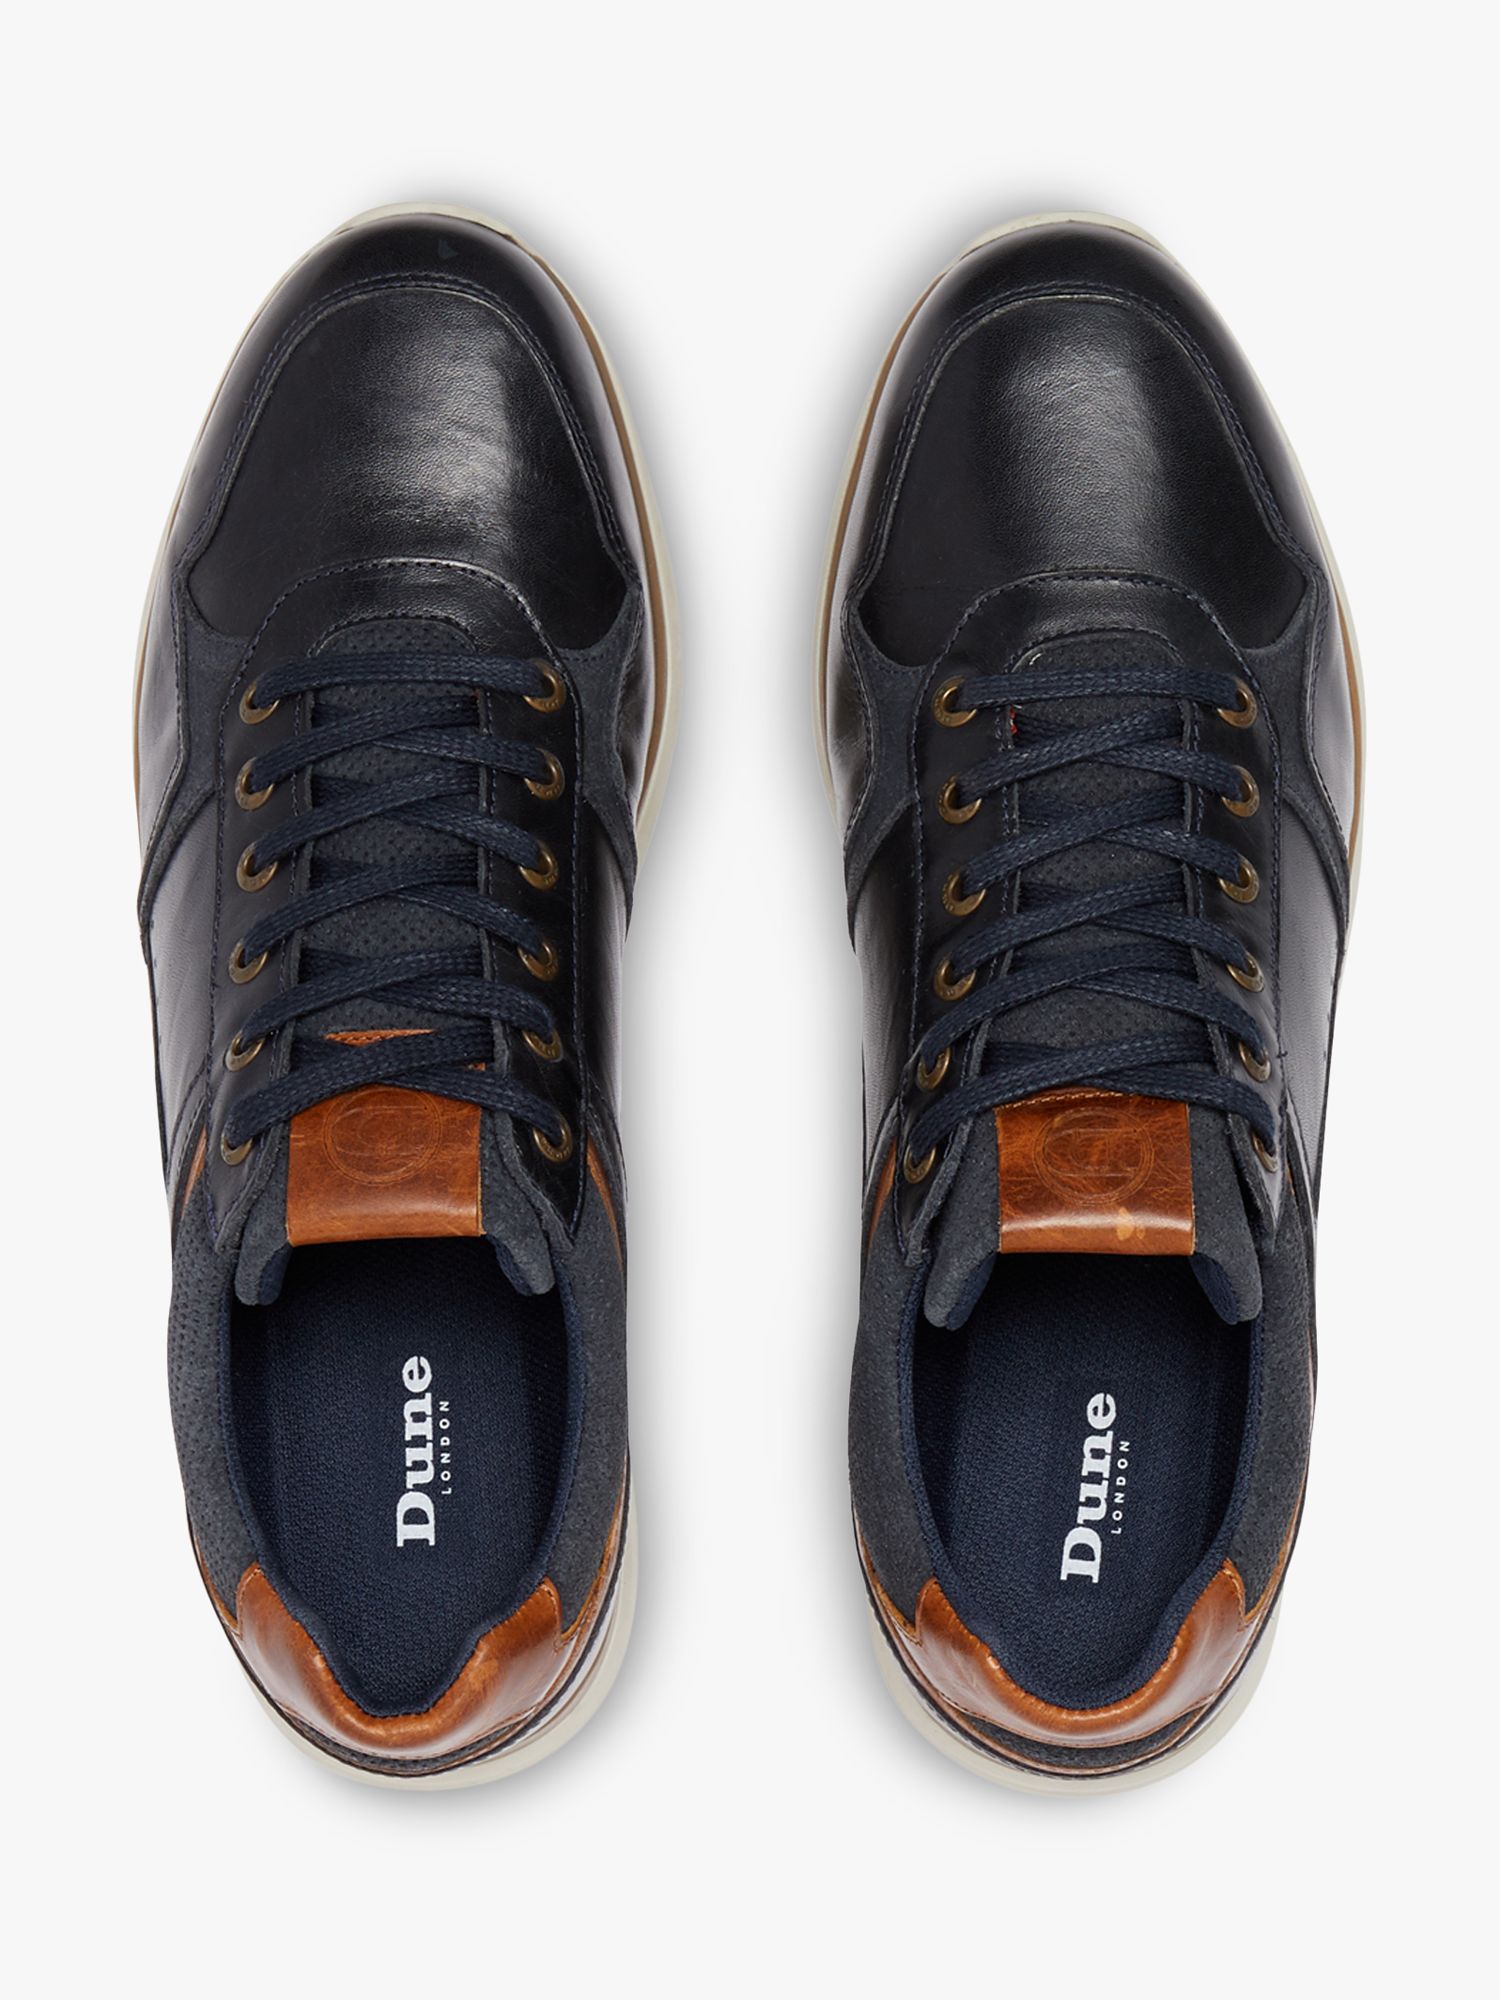 Dune Thymes Lace up Leather Trainers, Navy at John Lewis & Partners